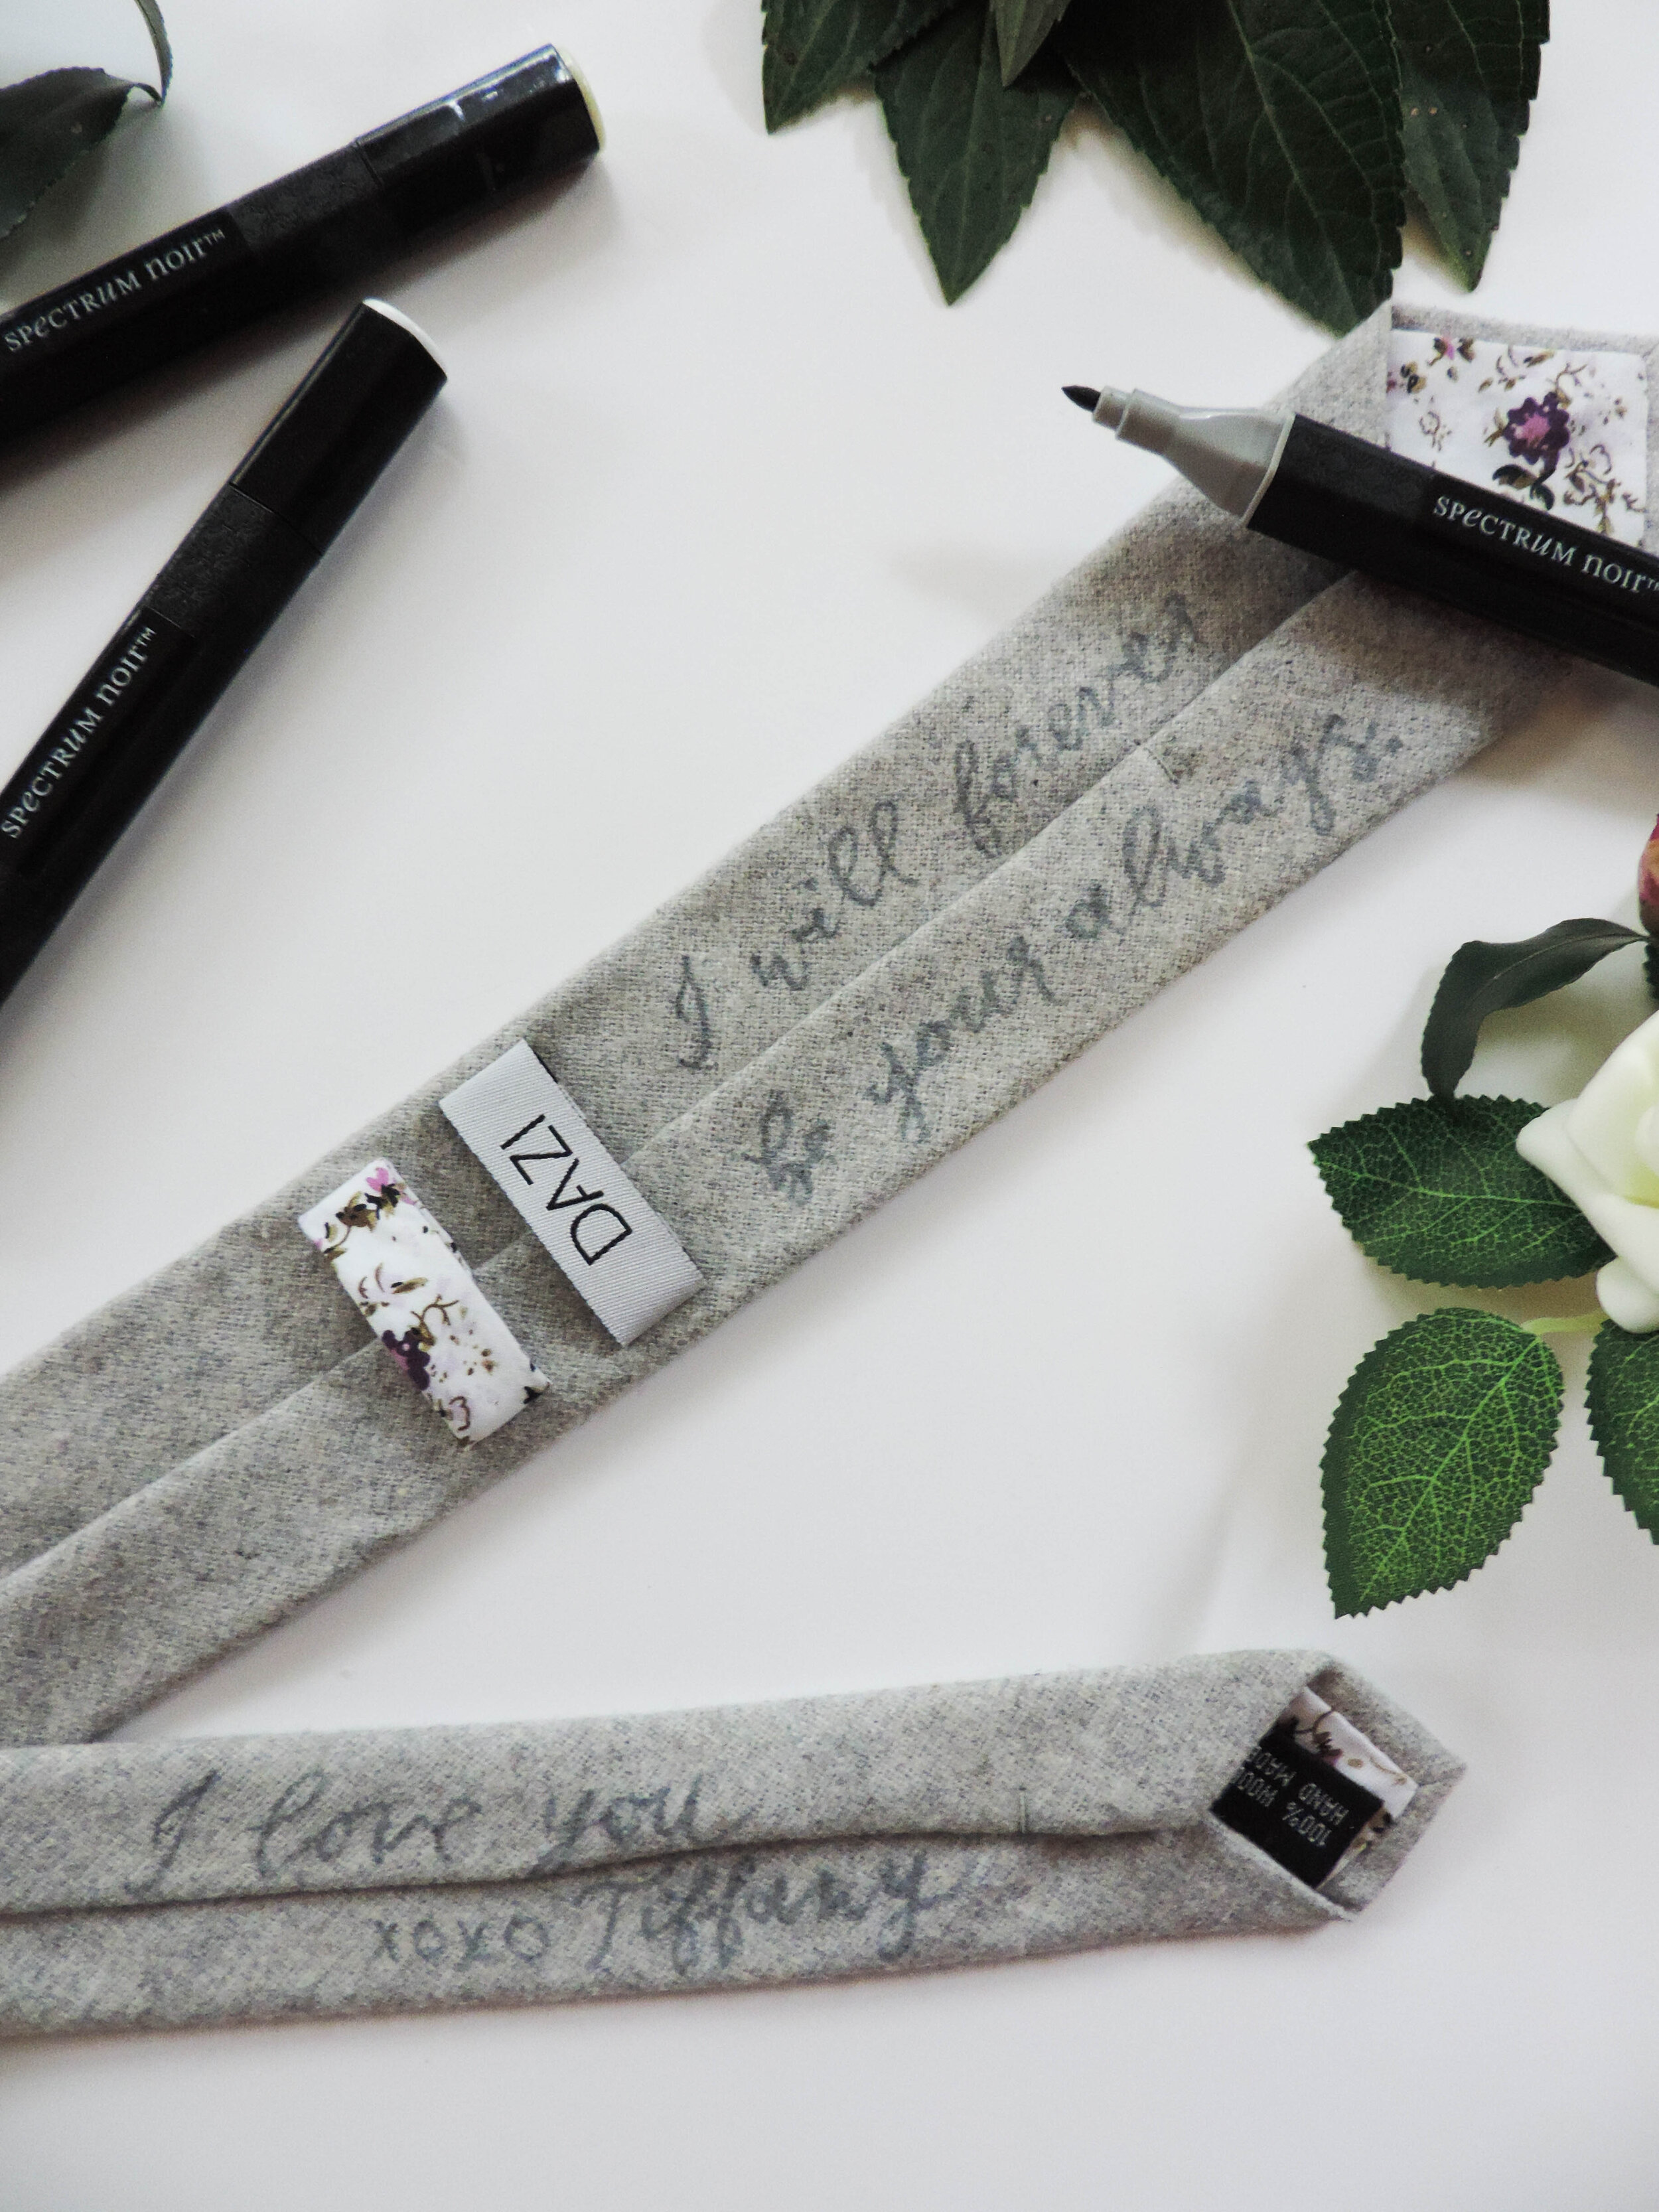 How to write on fabric by raleigh calligraphy &amp; design